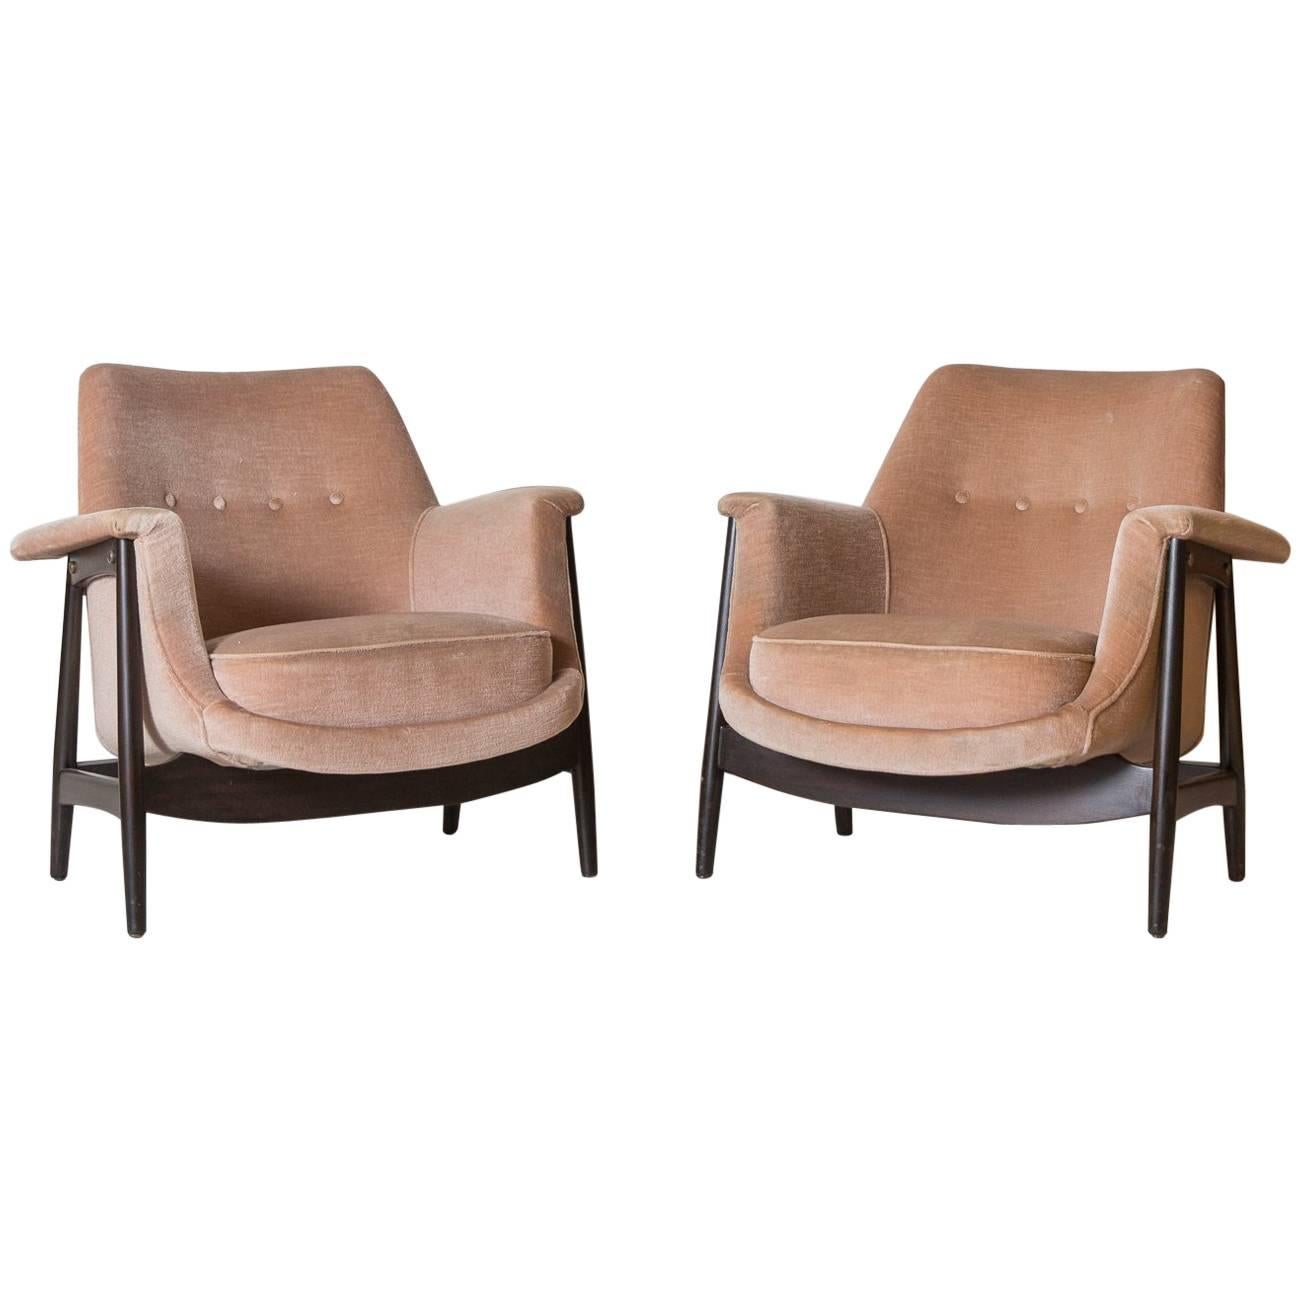 Knoll Midcentury Club Chairs Upholstered in Velvet with Exposed Mahogany Base